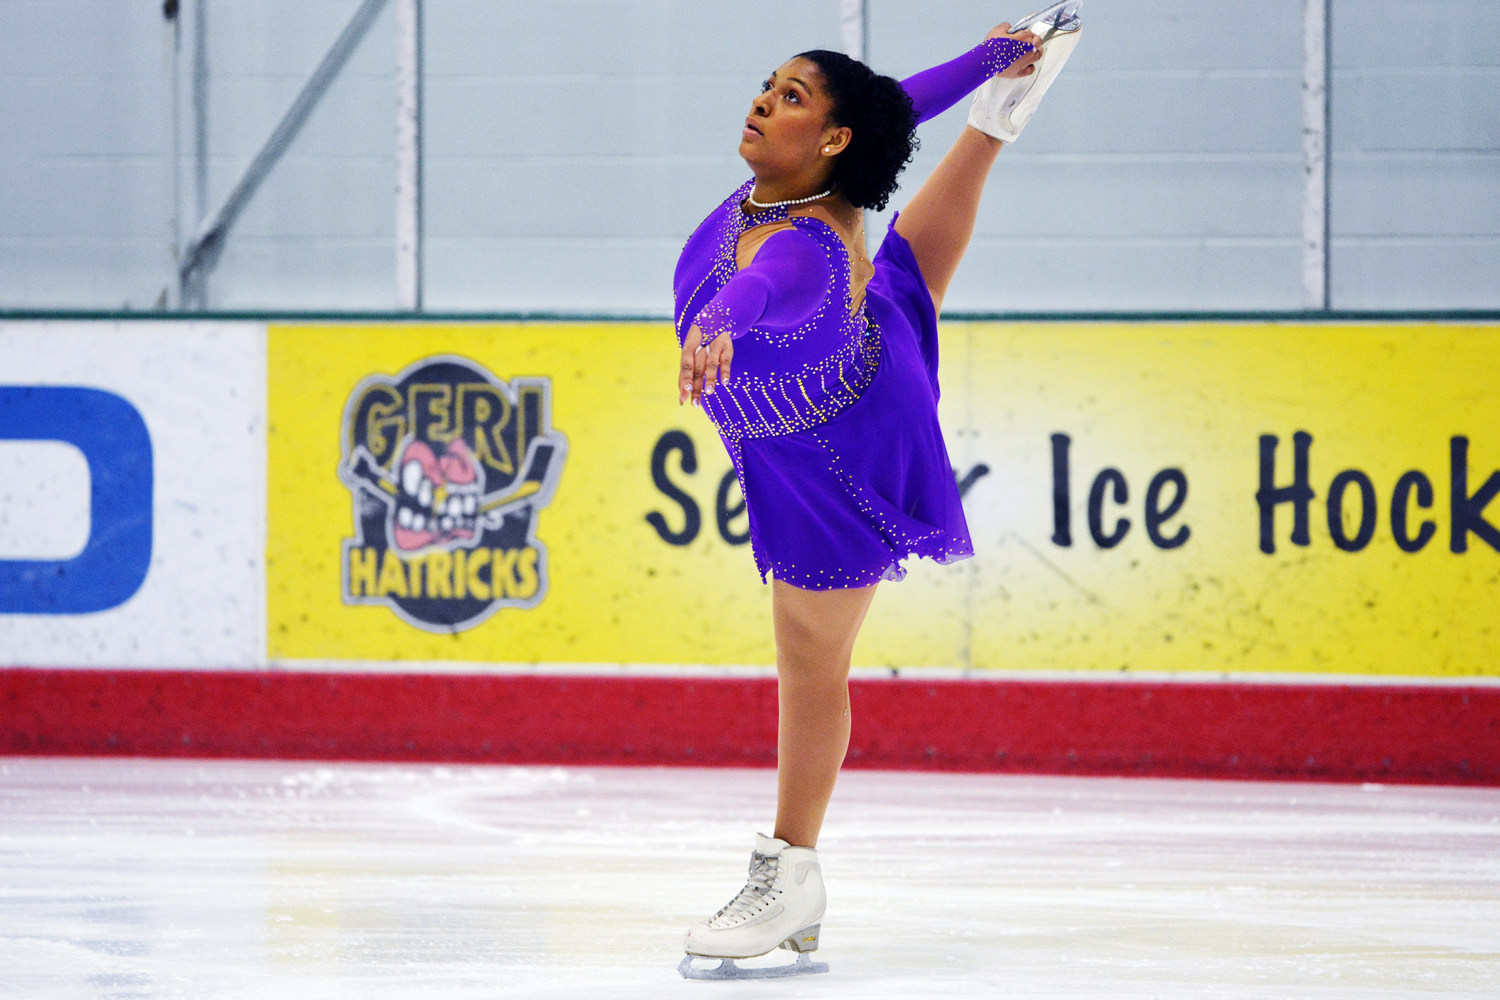 We don't look like them': Black figure skaters face barriers to entry from  a young age